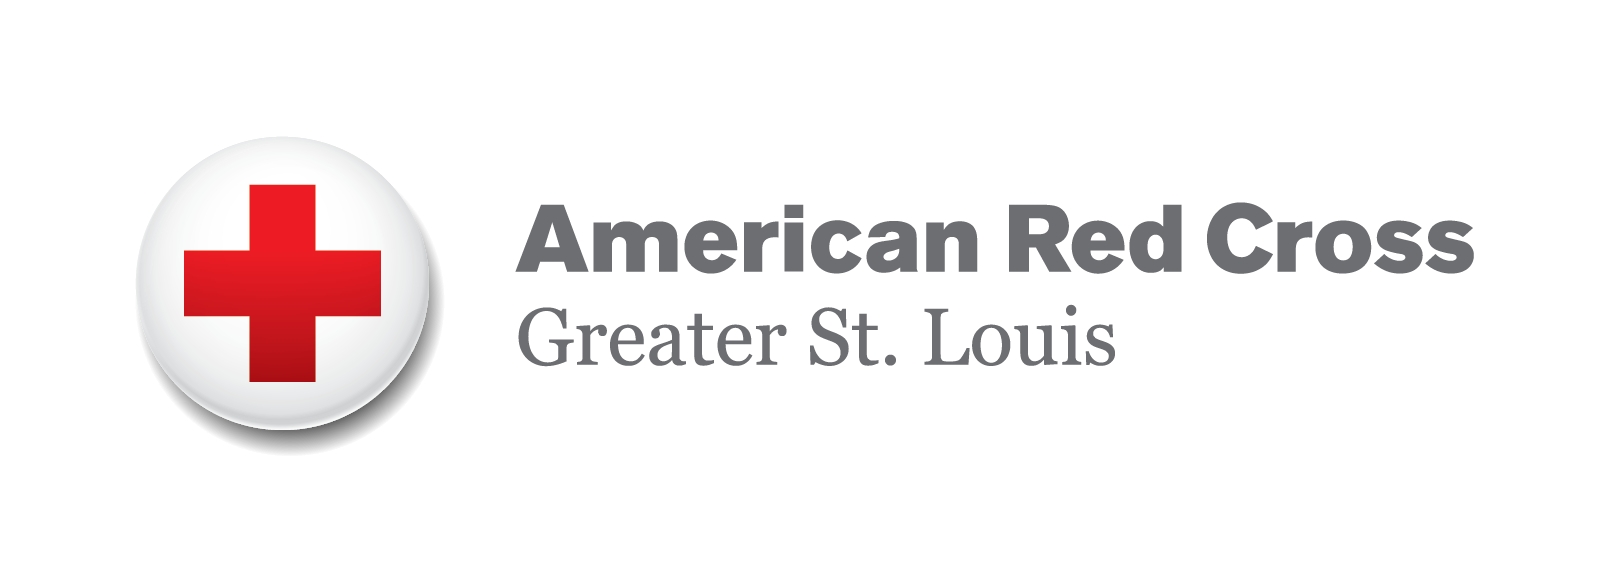 American Red Cross of Greater St. Louis